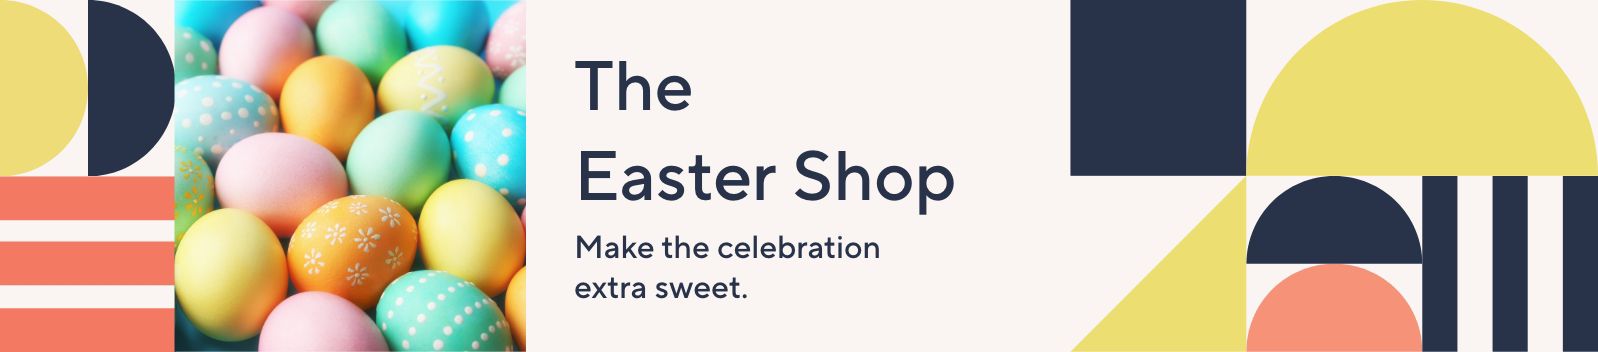 The Easter Shop: Make the celebration extra sweet.